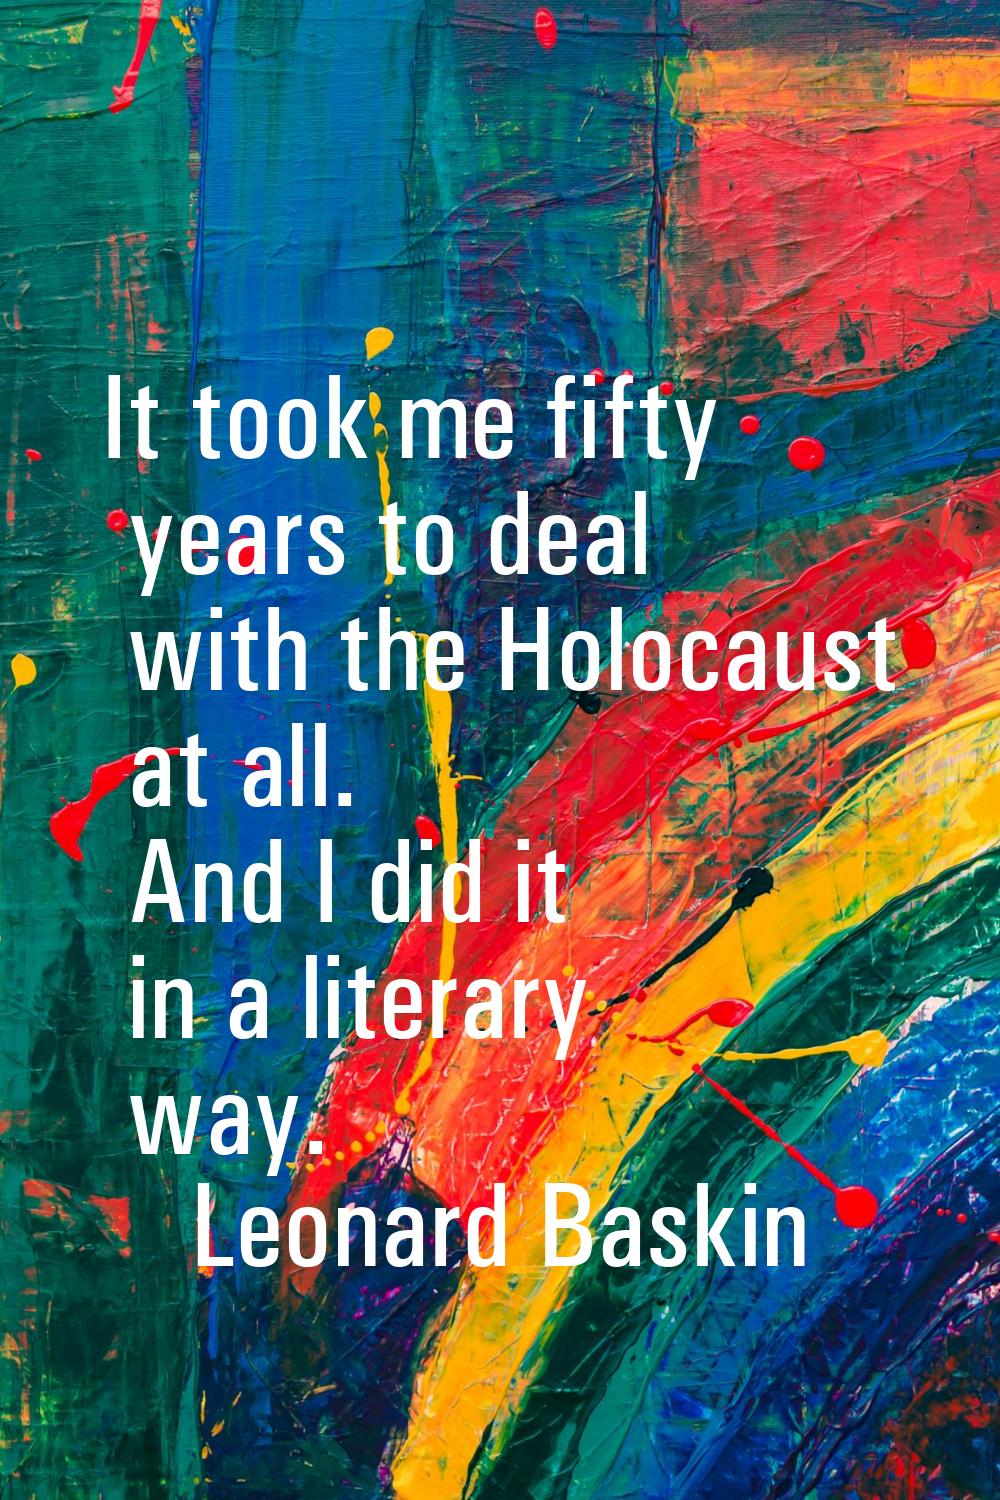 It took me fifty years to deal with the Holocaust at all. And I did it in a literary way.